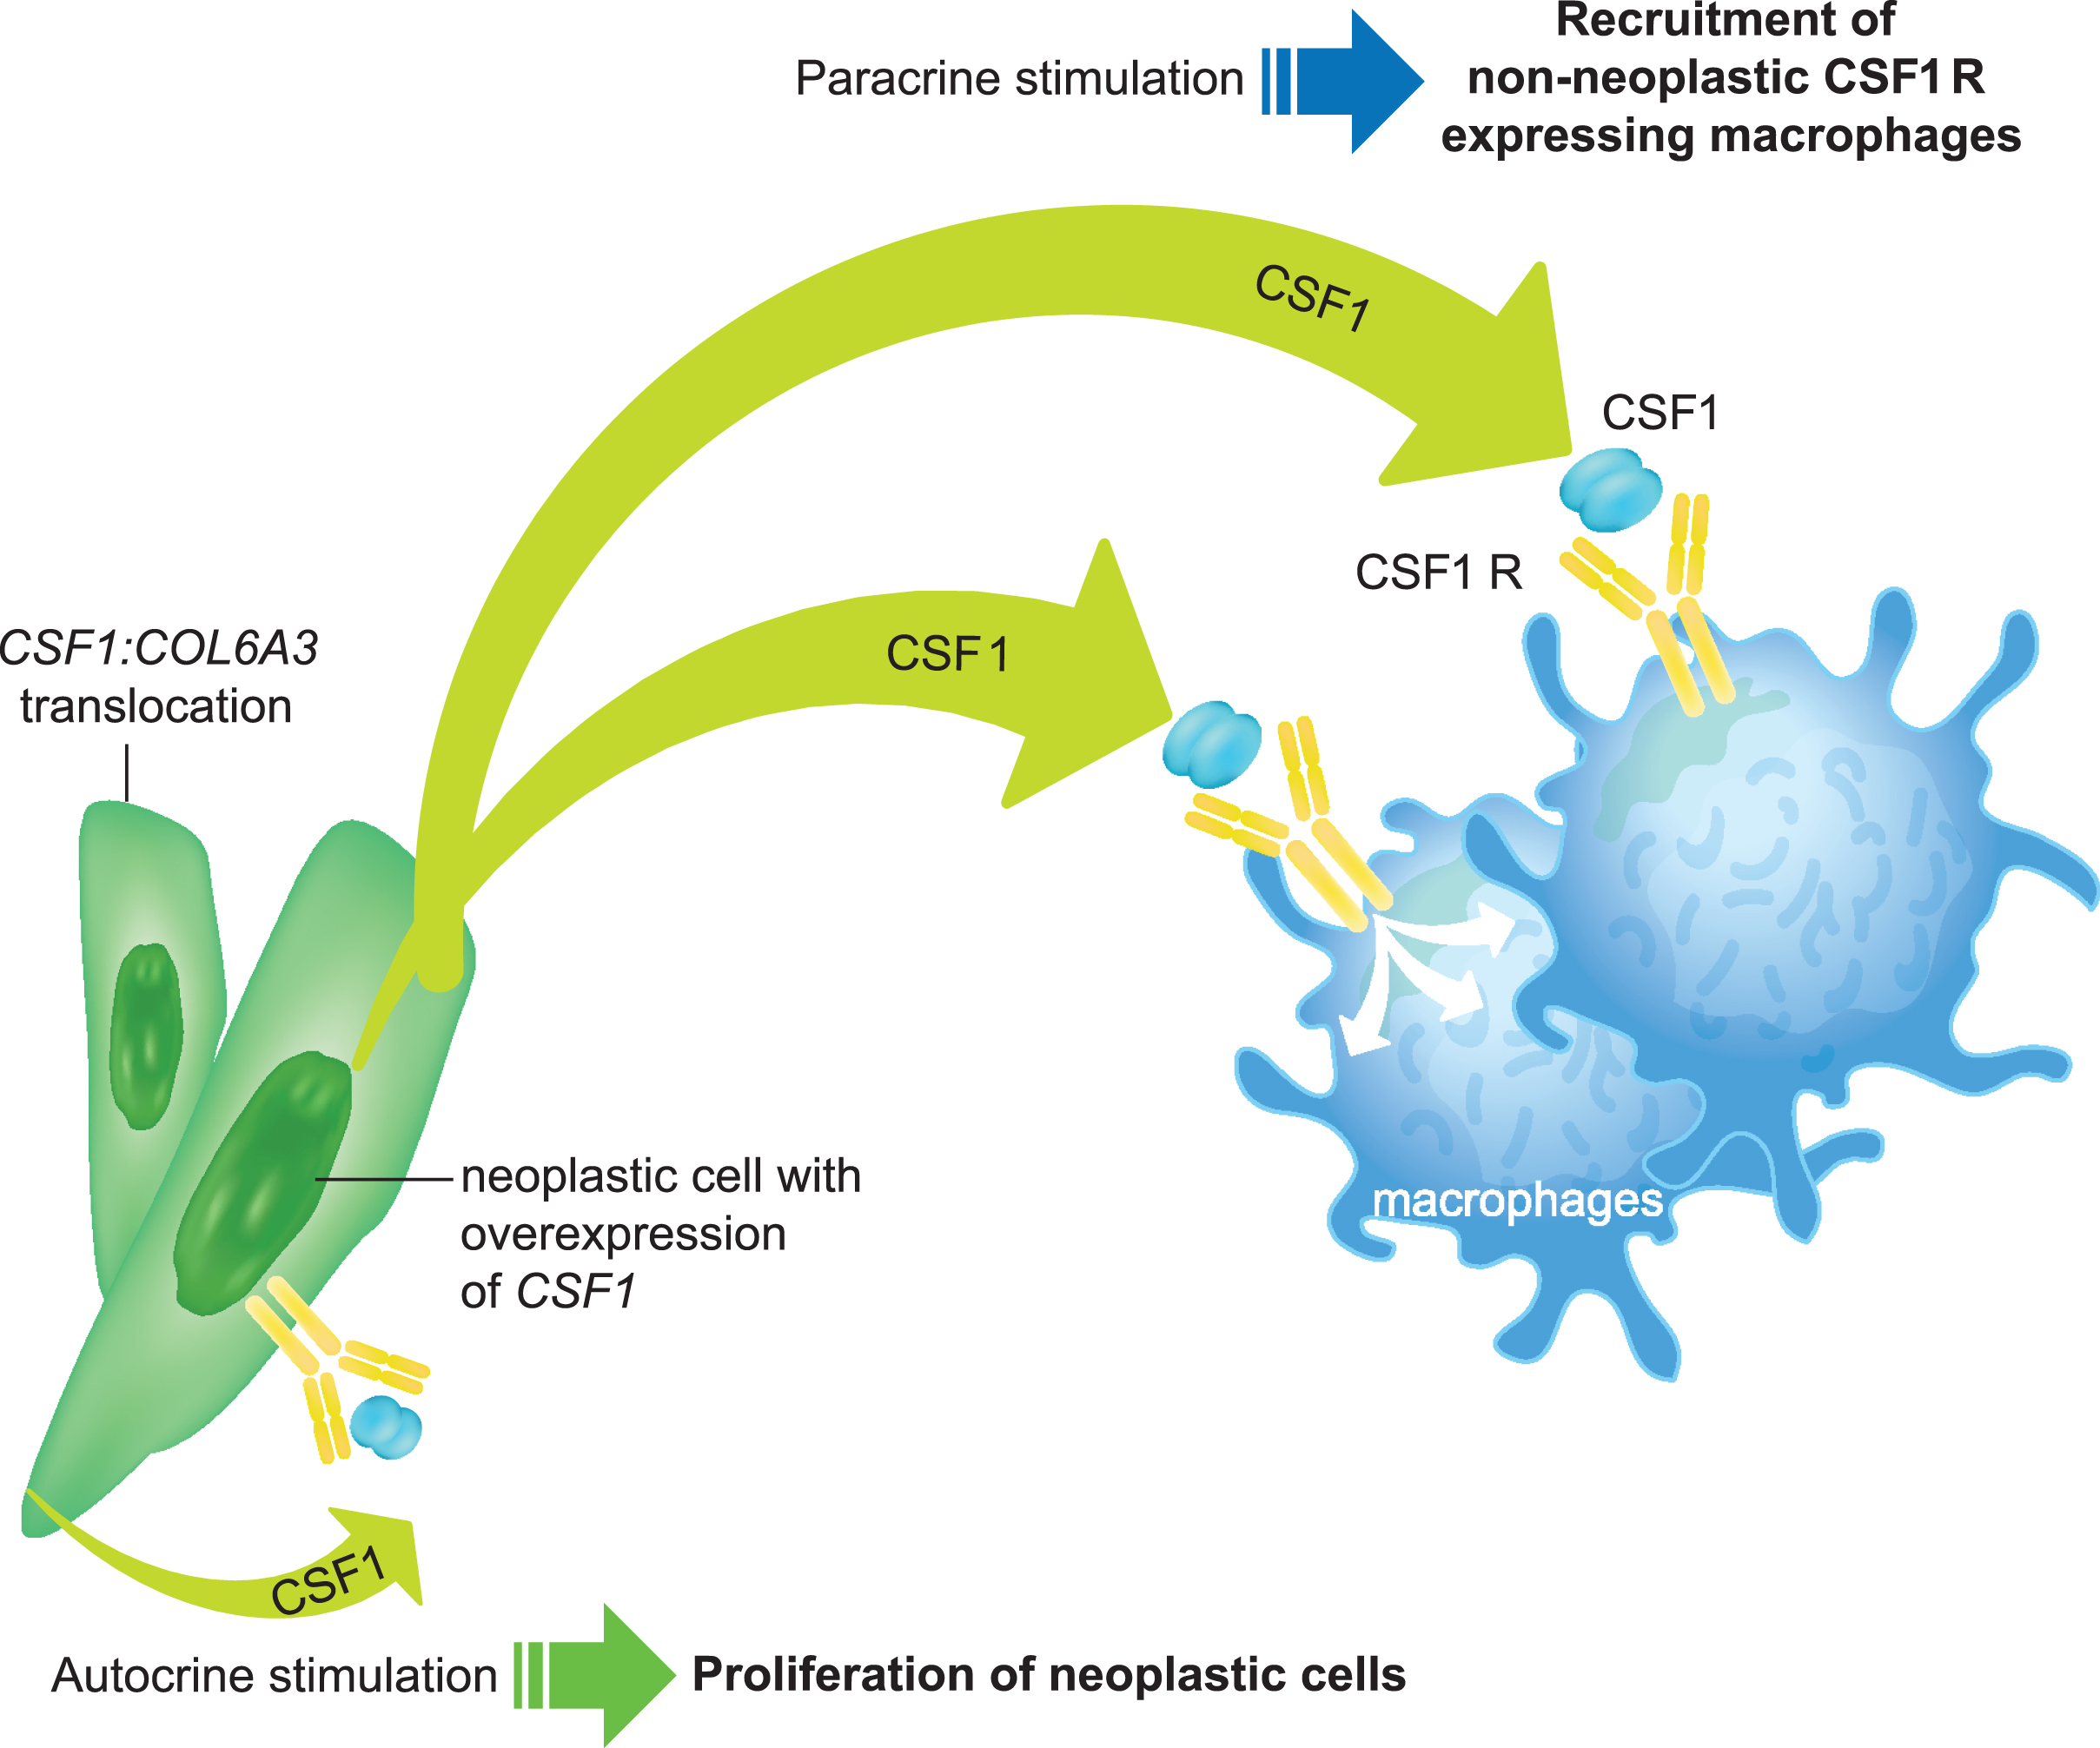 Role of the CSF1/CSF1R axis in the development of TGCT. Overexpression of CSF1R (e.g., through CSF1:COL6A3 gene translocation) promotes cell proliferation and accumulation in the synovium, while binding of the CSF1 ligand to the CSF1R leads to activation of signaling pathways that modulate differentiation, proliferation, and chemotaxis toward the source of CSF1, leading to the recruitment of inflammatory cells to the joint cavity.CSF1, colony-stimulating factor 1; CSF1R, colony-stimulating factor 1 receptor; TGCT, tenosynovial giant cell tumor.